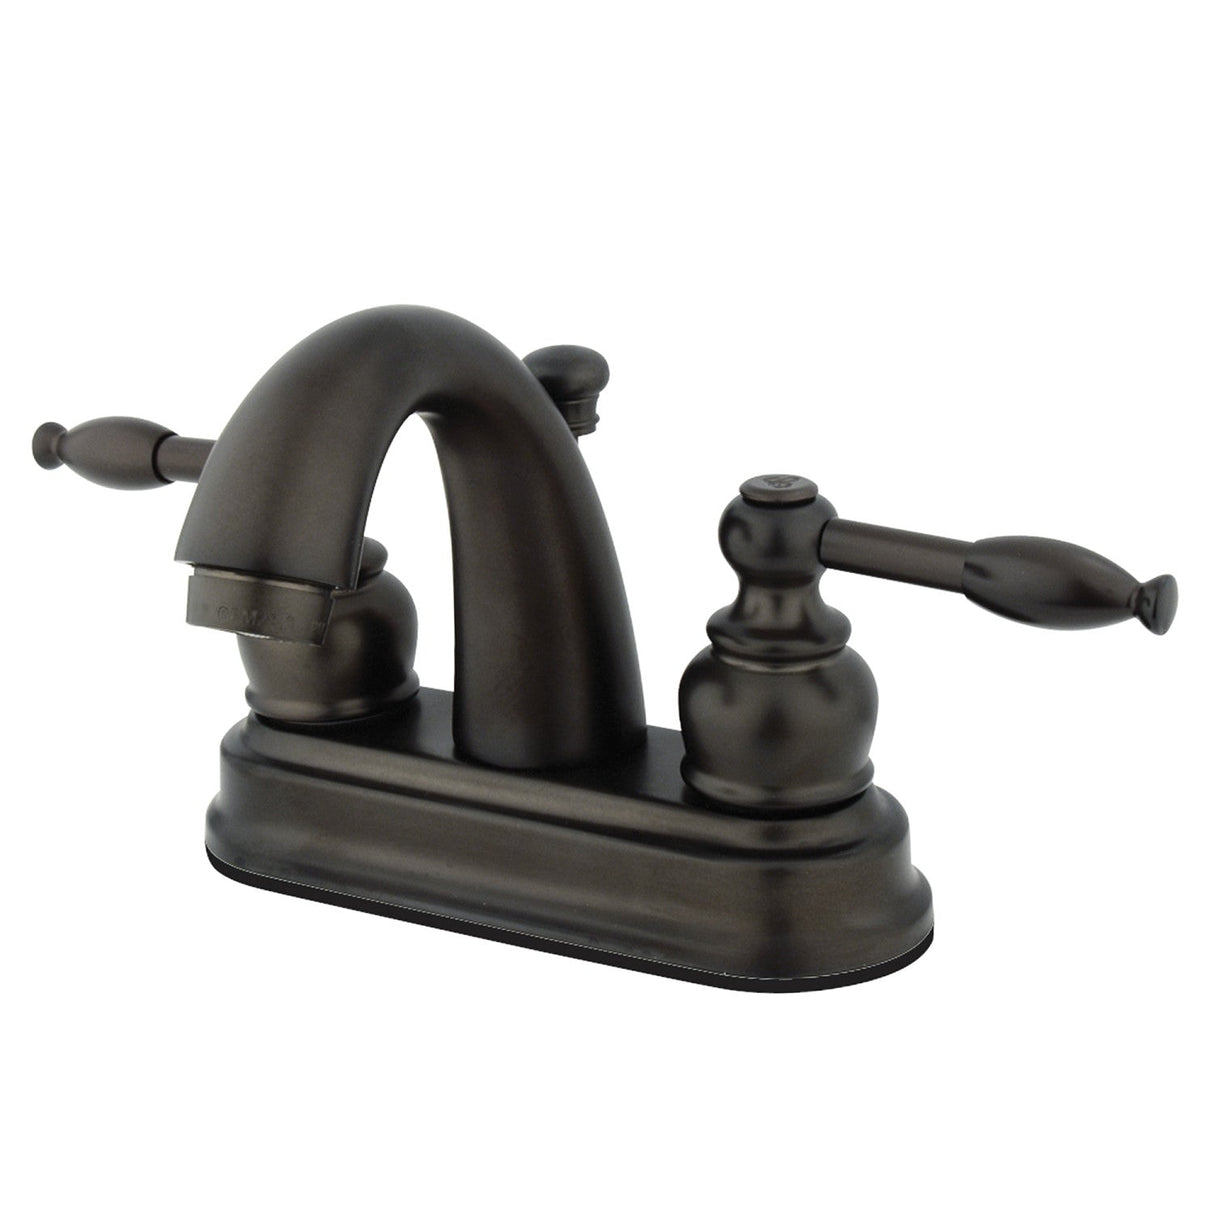 Knight GKB5615KL Two-Handle 3-Hole Deck Mount 4" Centerset Bathroom Faucet with Plastic Pop-Up, Oil Rubbed Bronze